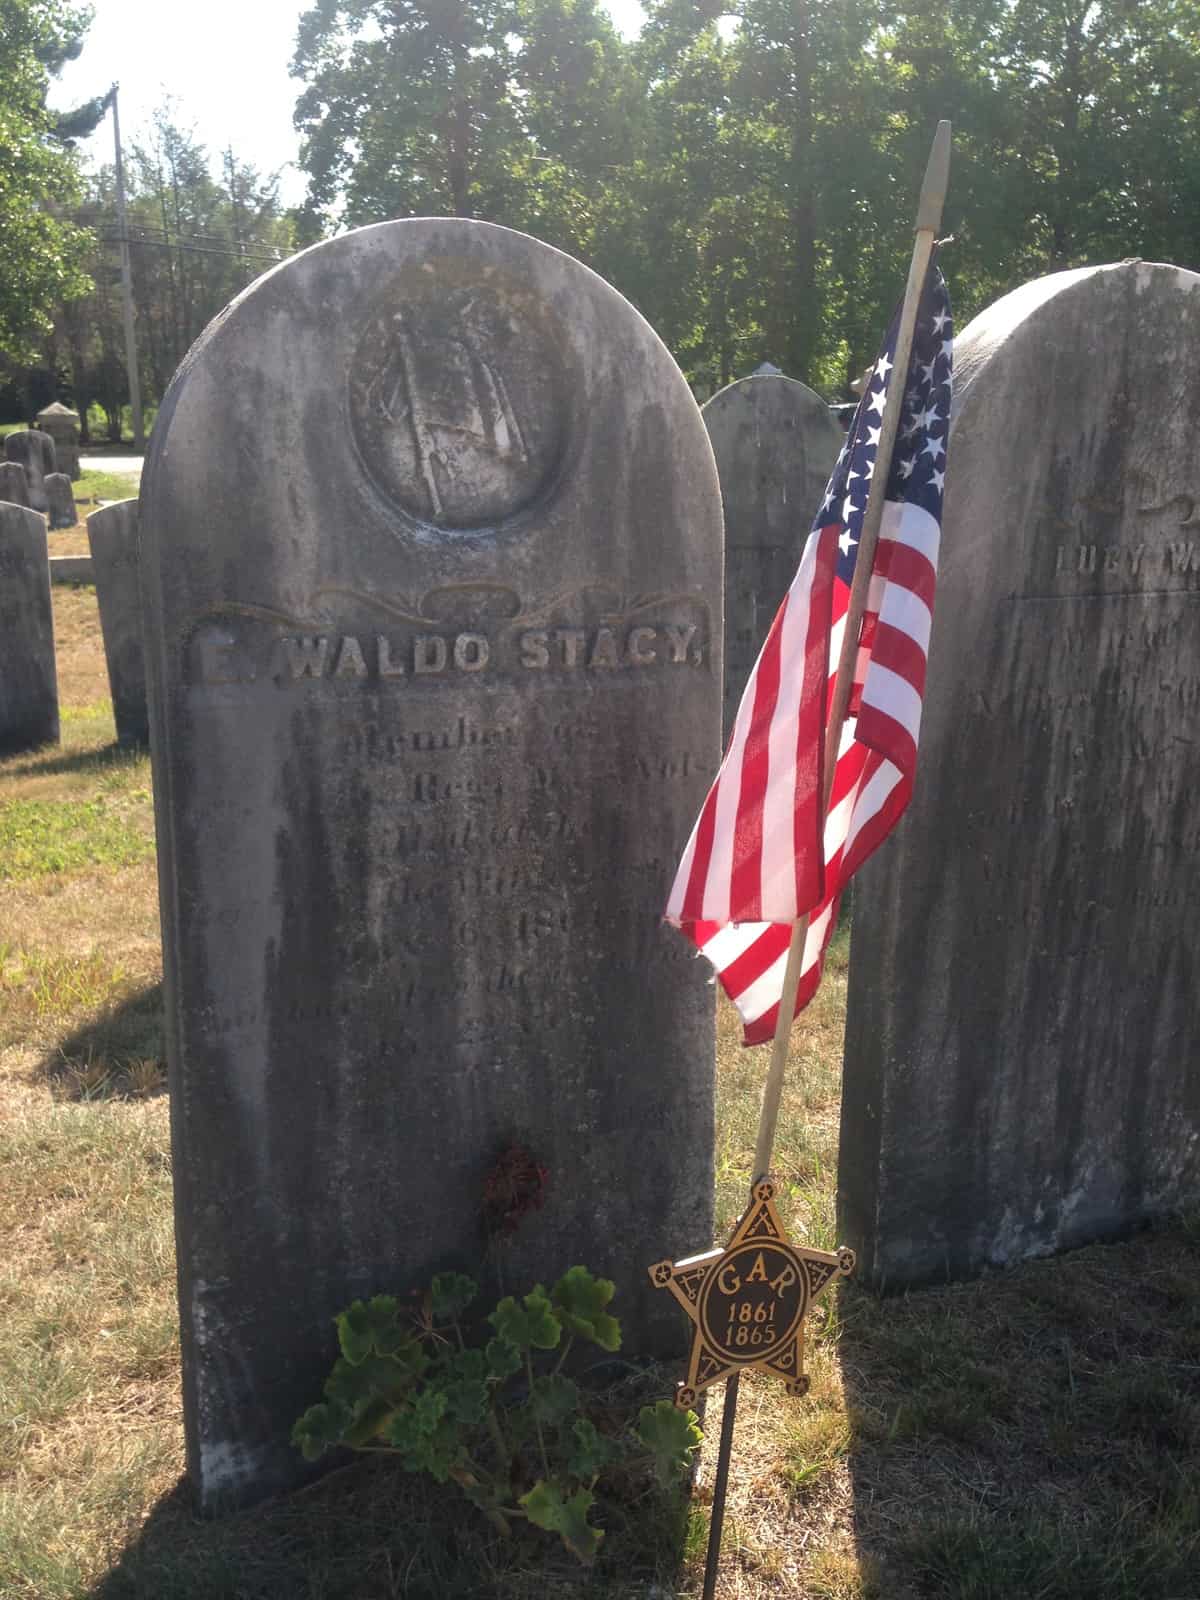 During our New England stay, I walked through this old graveyard in the rural town of Harvard, Mass. I was touched by the numerous military graves from both the American Revolution and the Civil War. This grave of Waldo Stacy caught my heart. I caught myself saying, "You weren't on our side, but you were on the right side." 